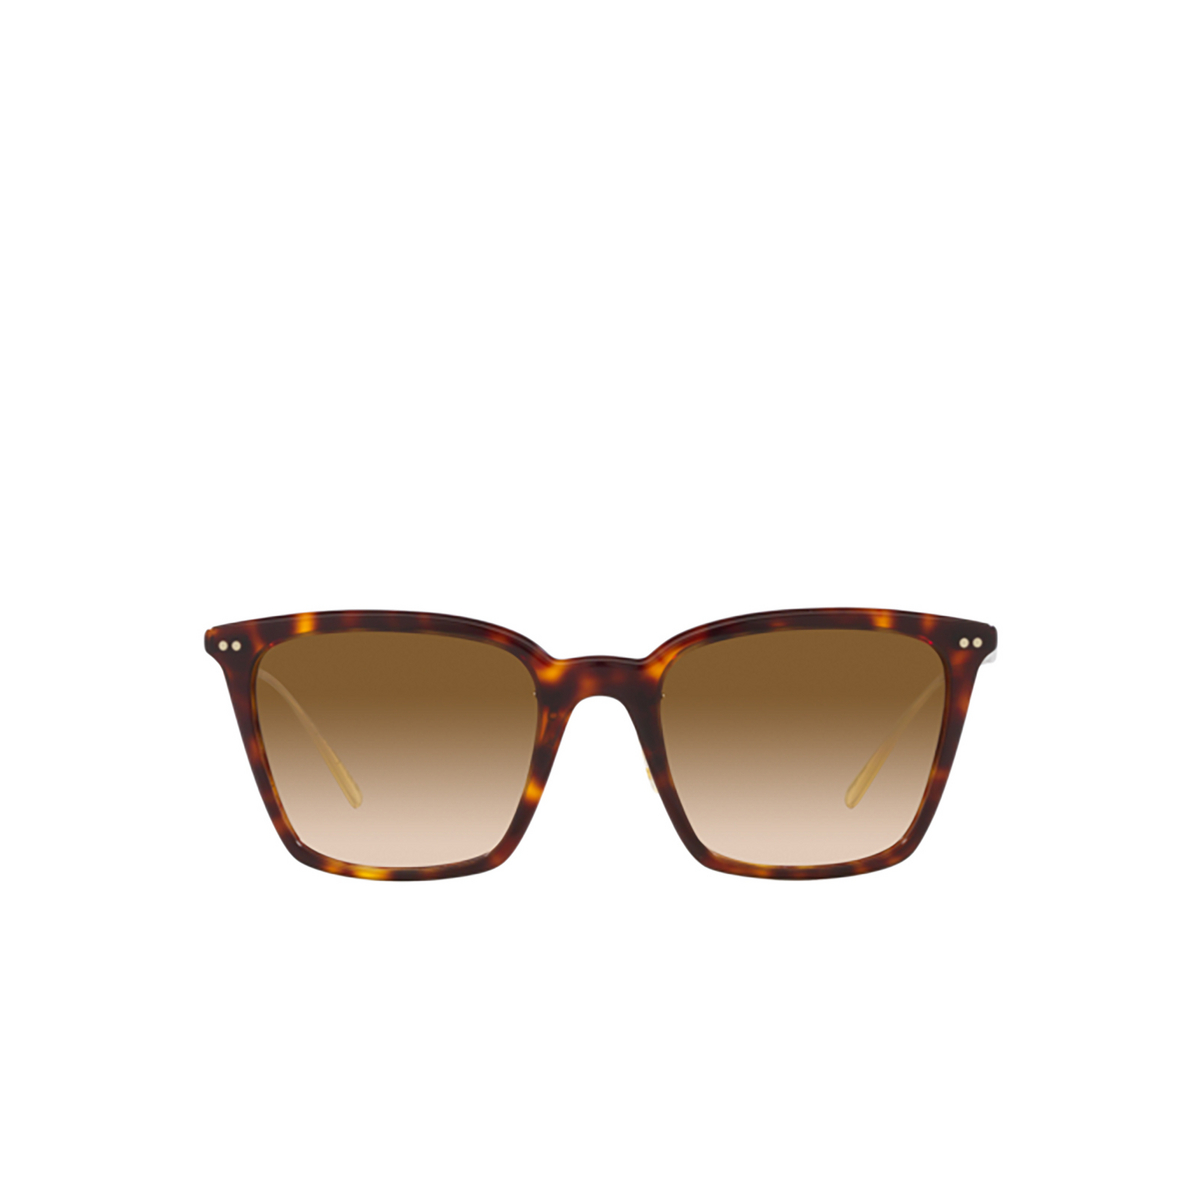 Oliver Peoples LUISELLA Sunglasses 176851 Amaro Tortoise / Gold - front view